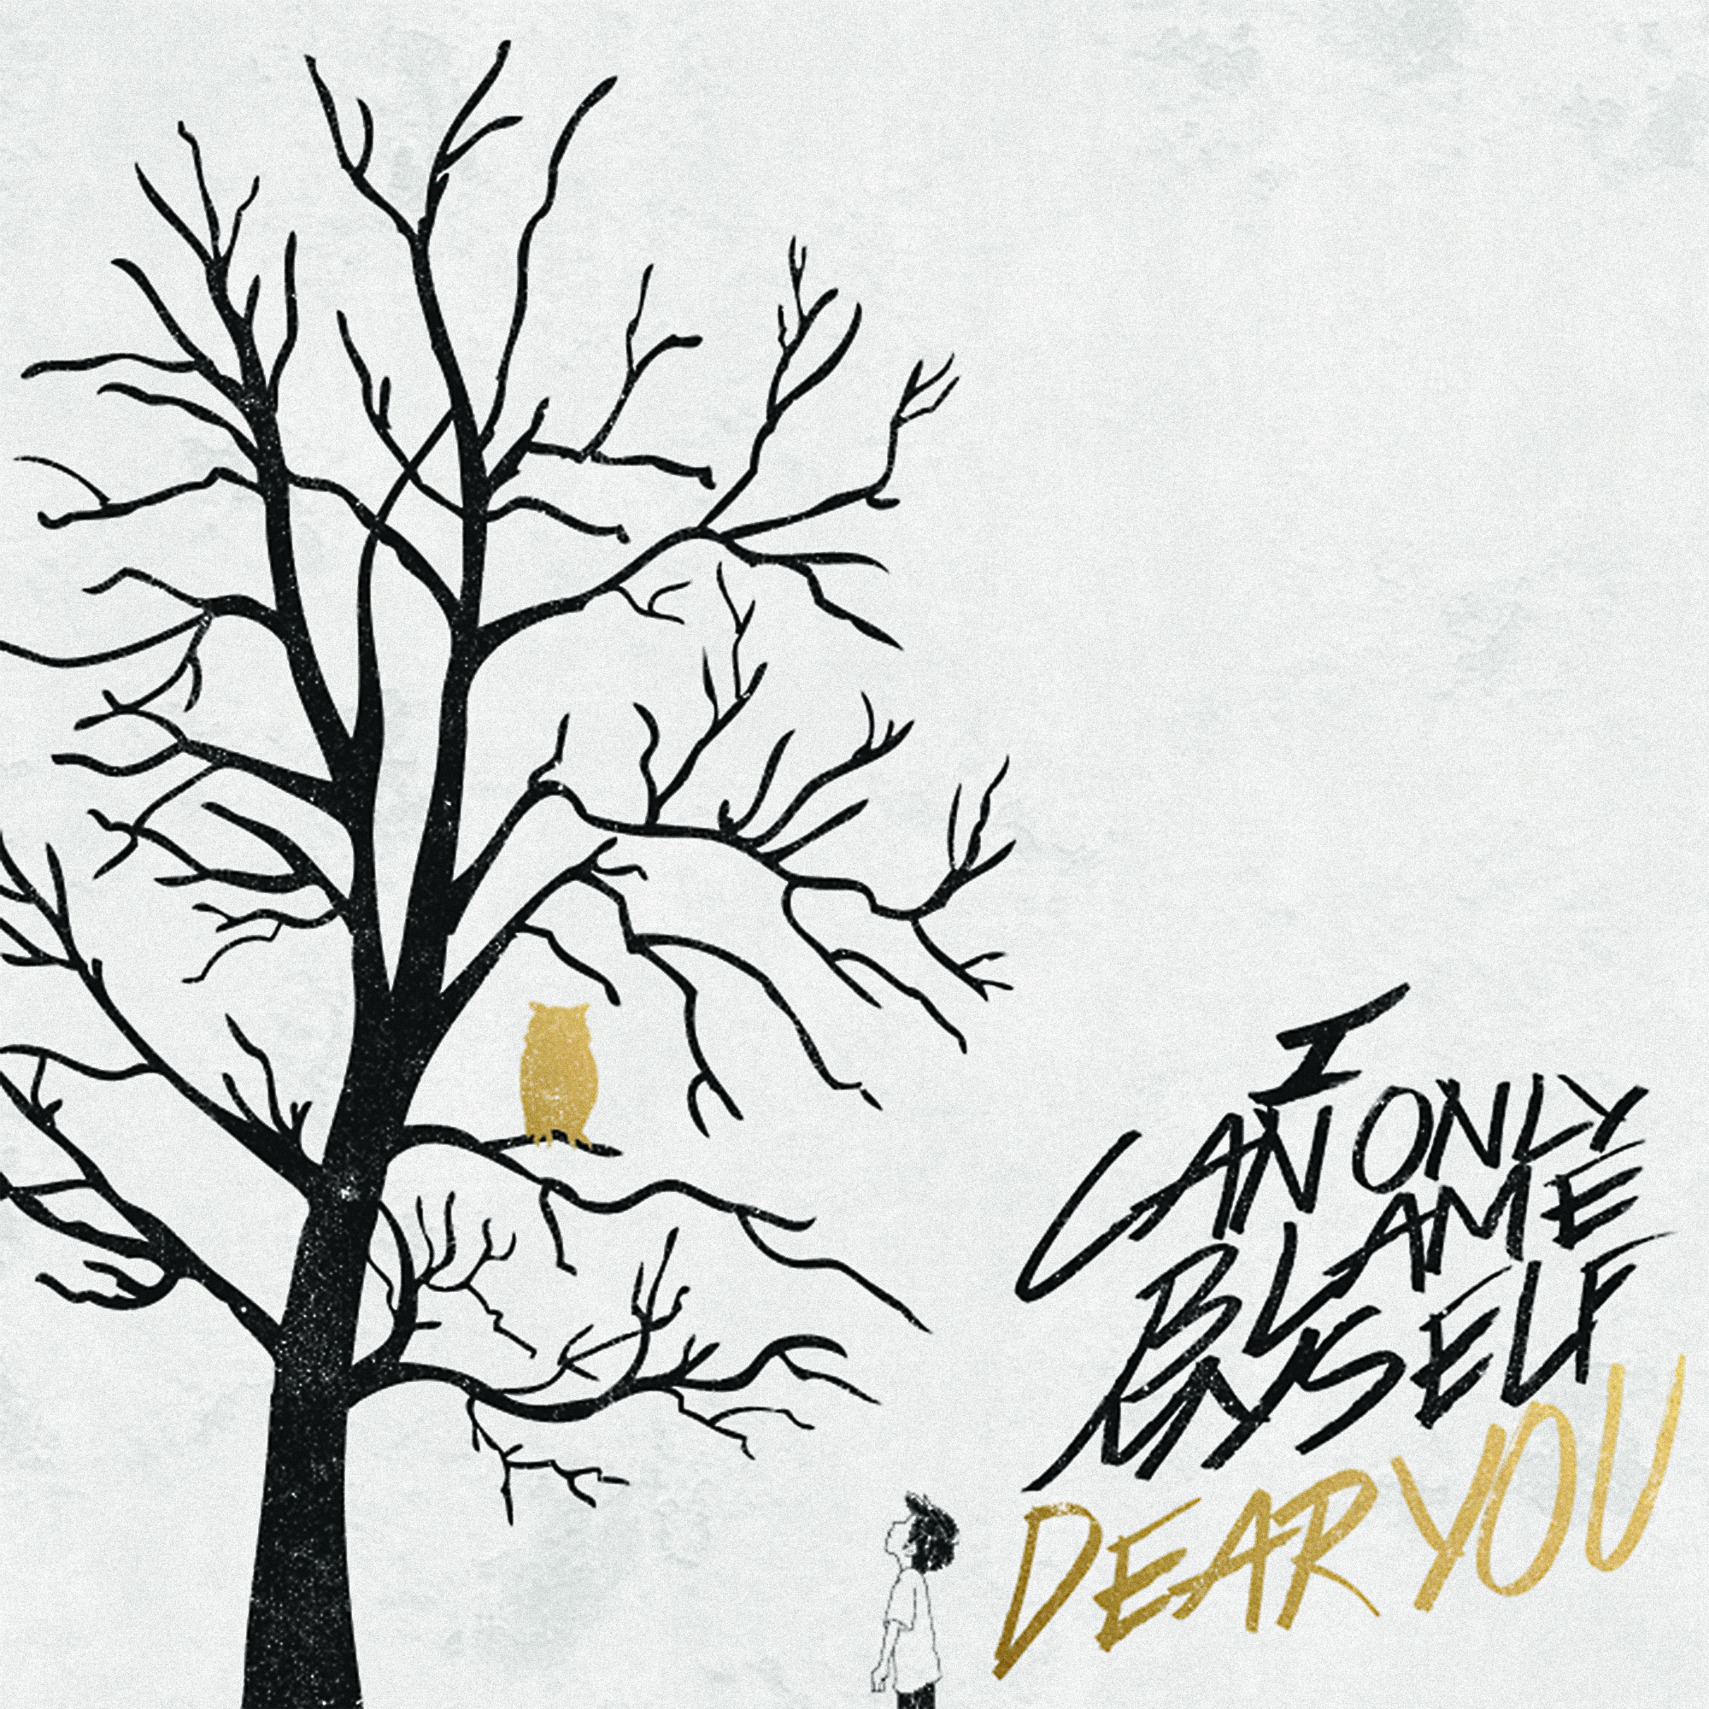 Tastes Like Rock - Dear You - I Can Only Blame Myself Review